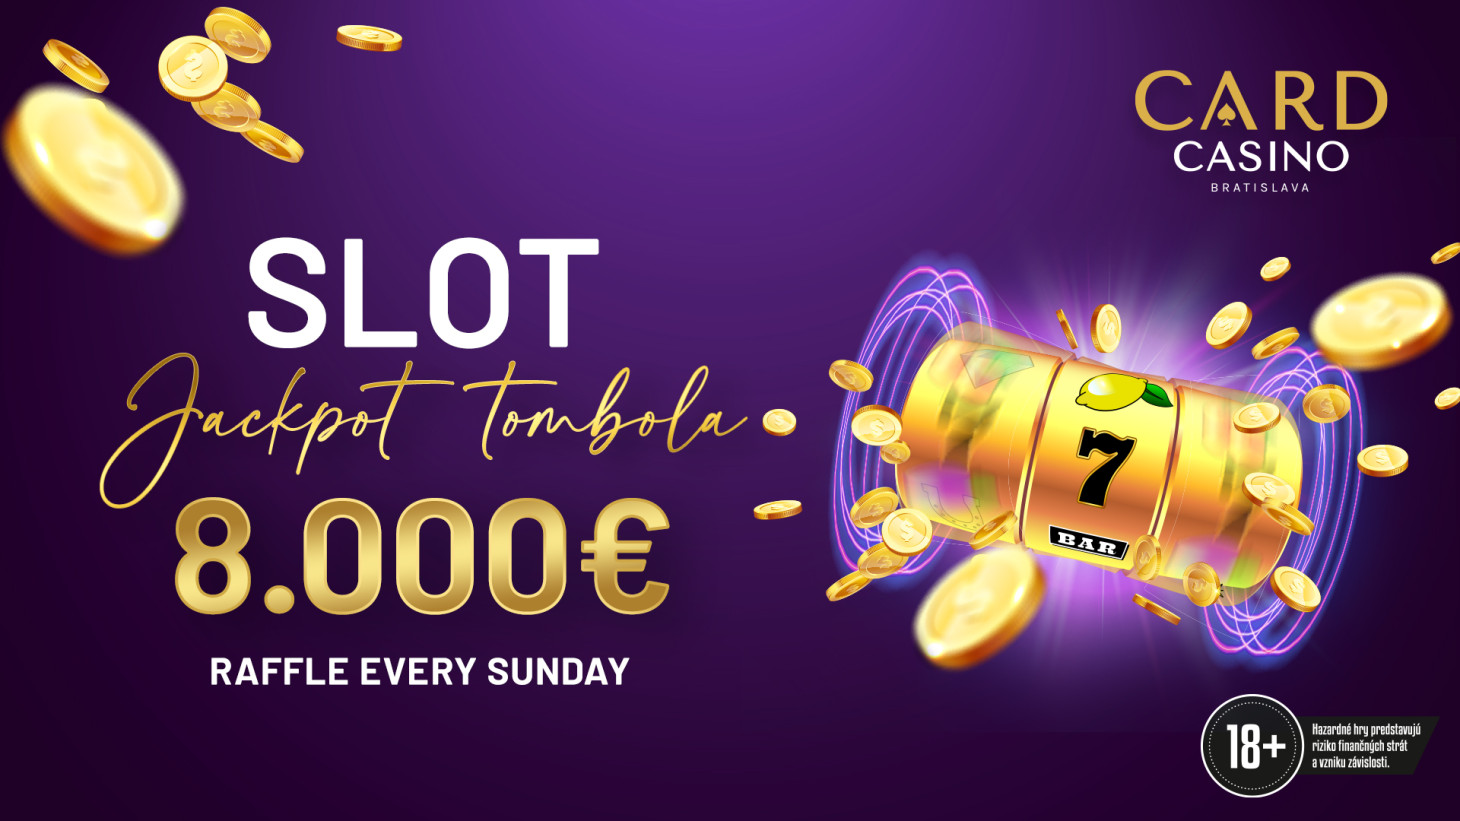 February full of money. Slot Jackpot raffle contains games for 8000EUR!